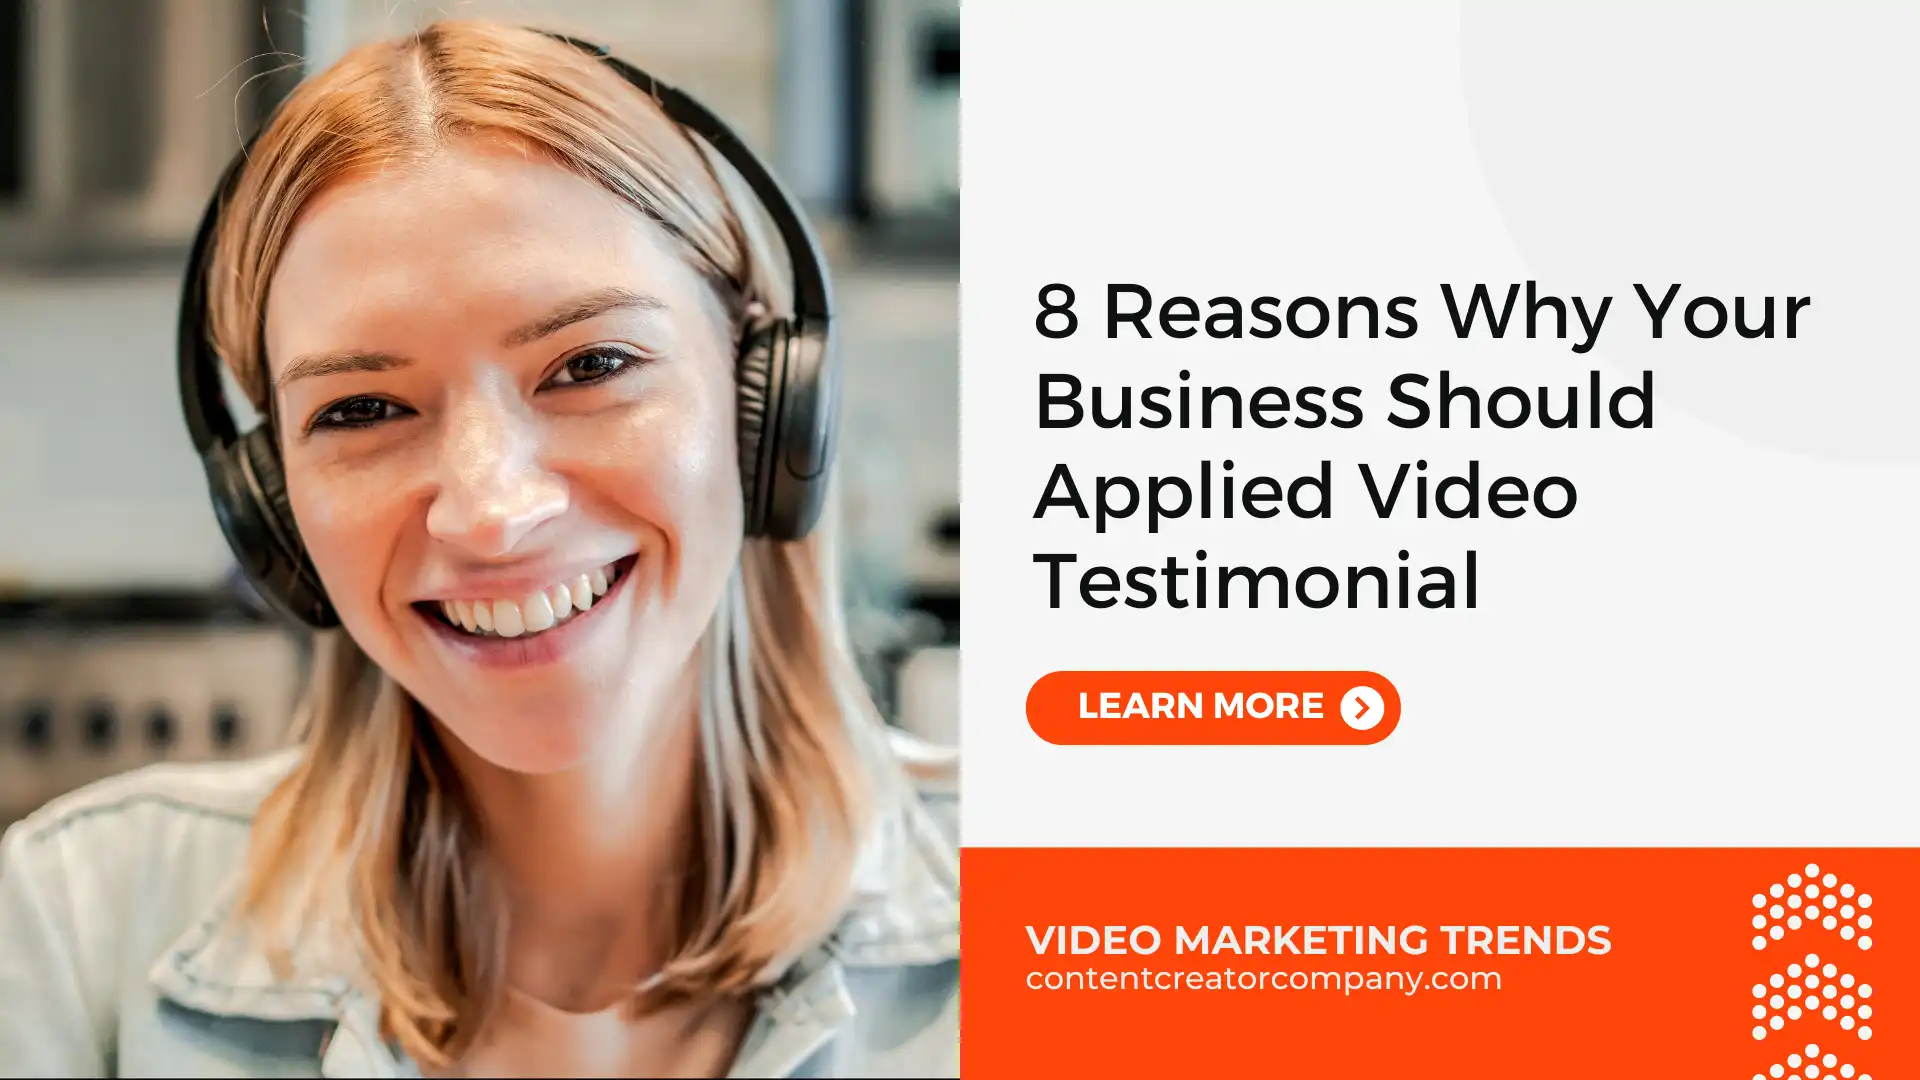 8 Reasons Why Your Business Should Applied Video Testimonial